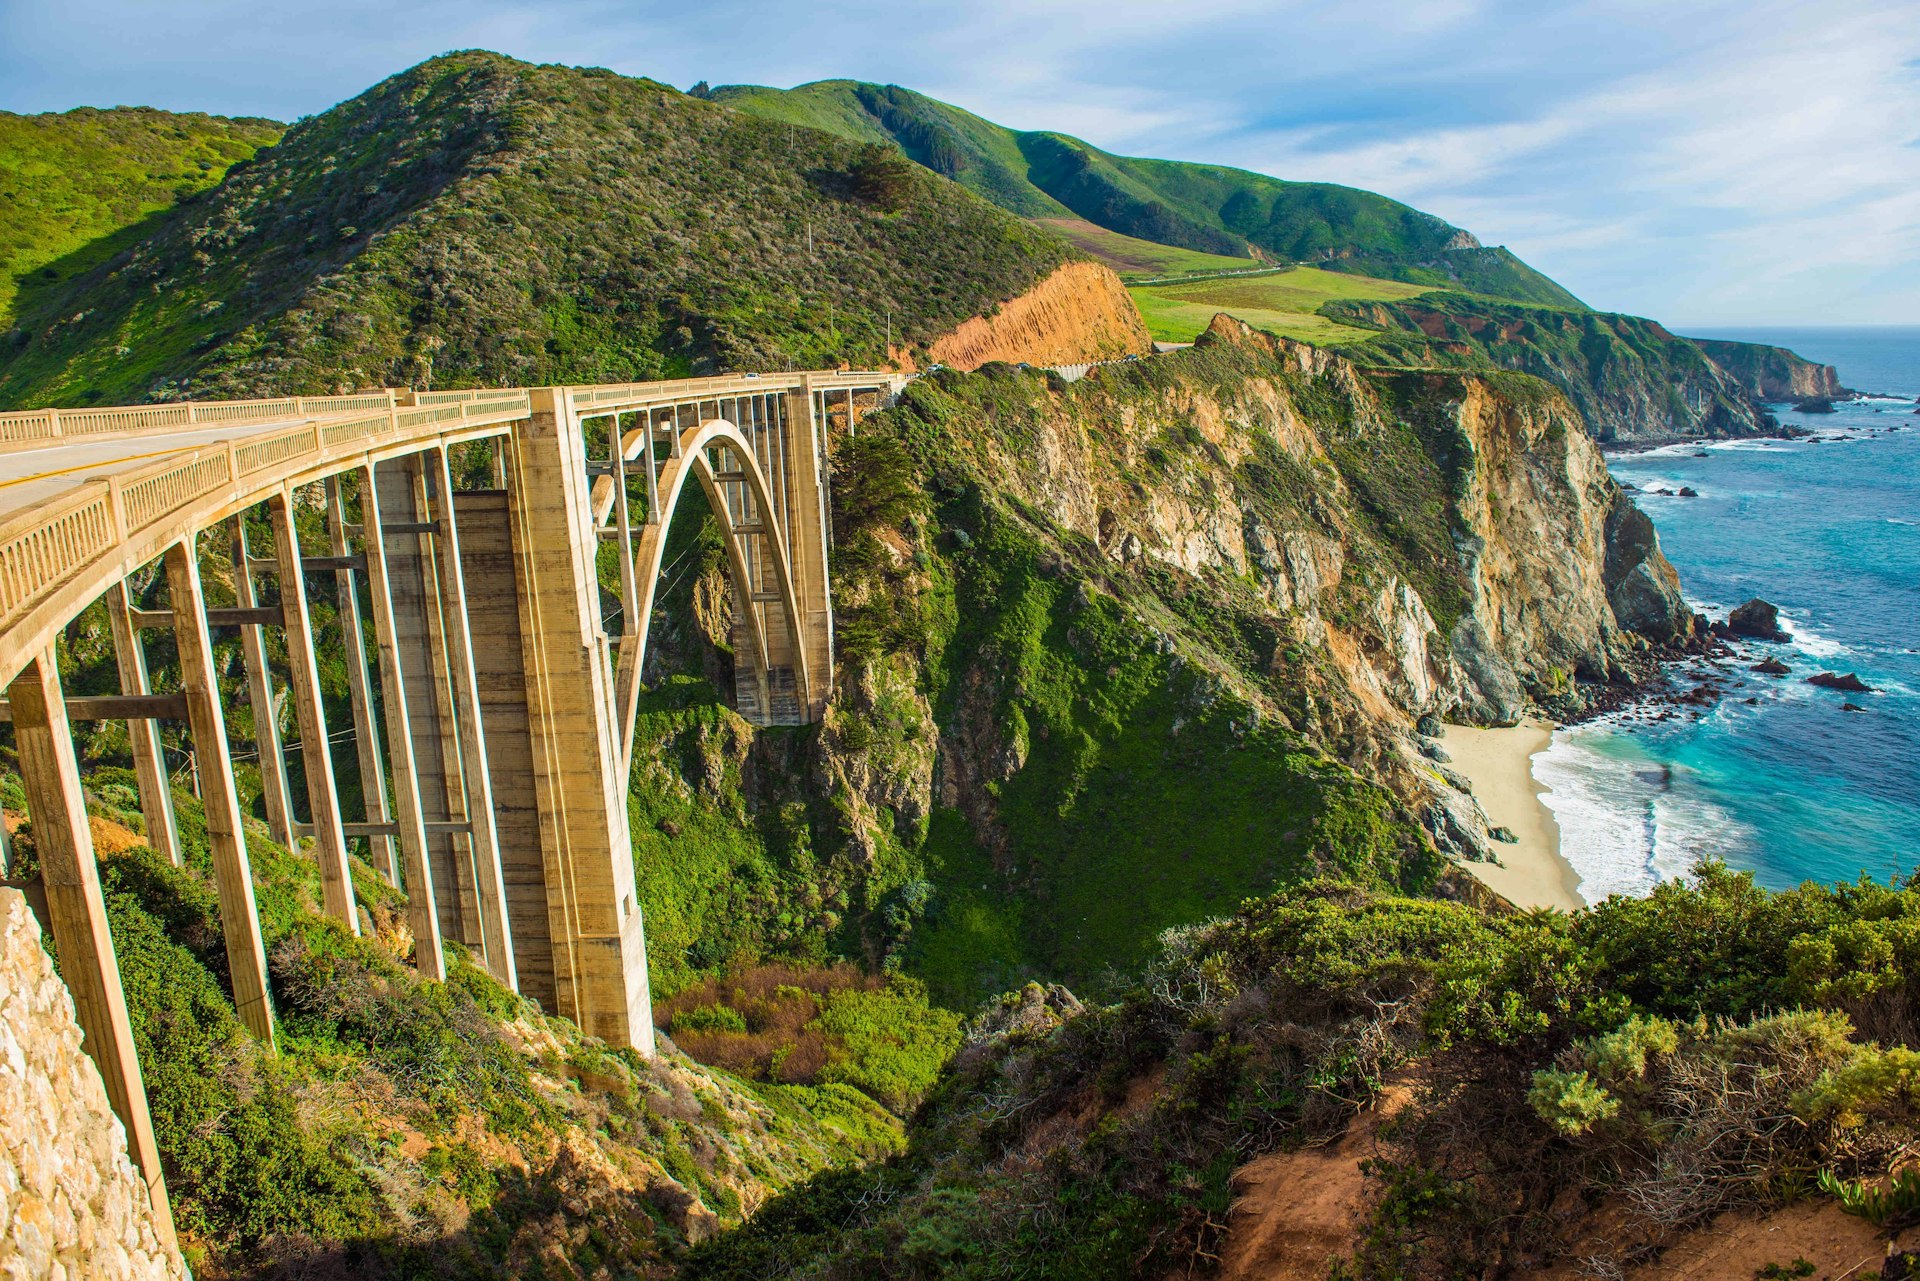 Pacific coast road closures give visitors opportunity to bike 'Big Sur